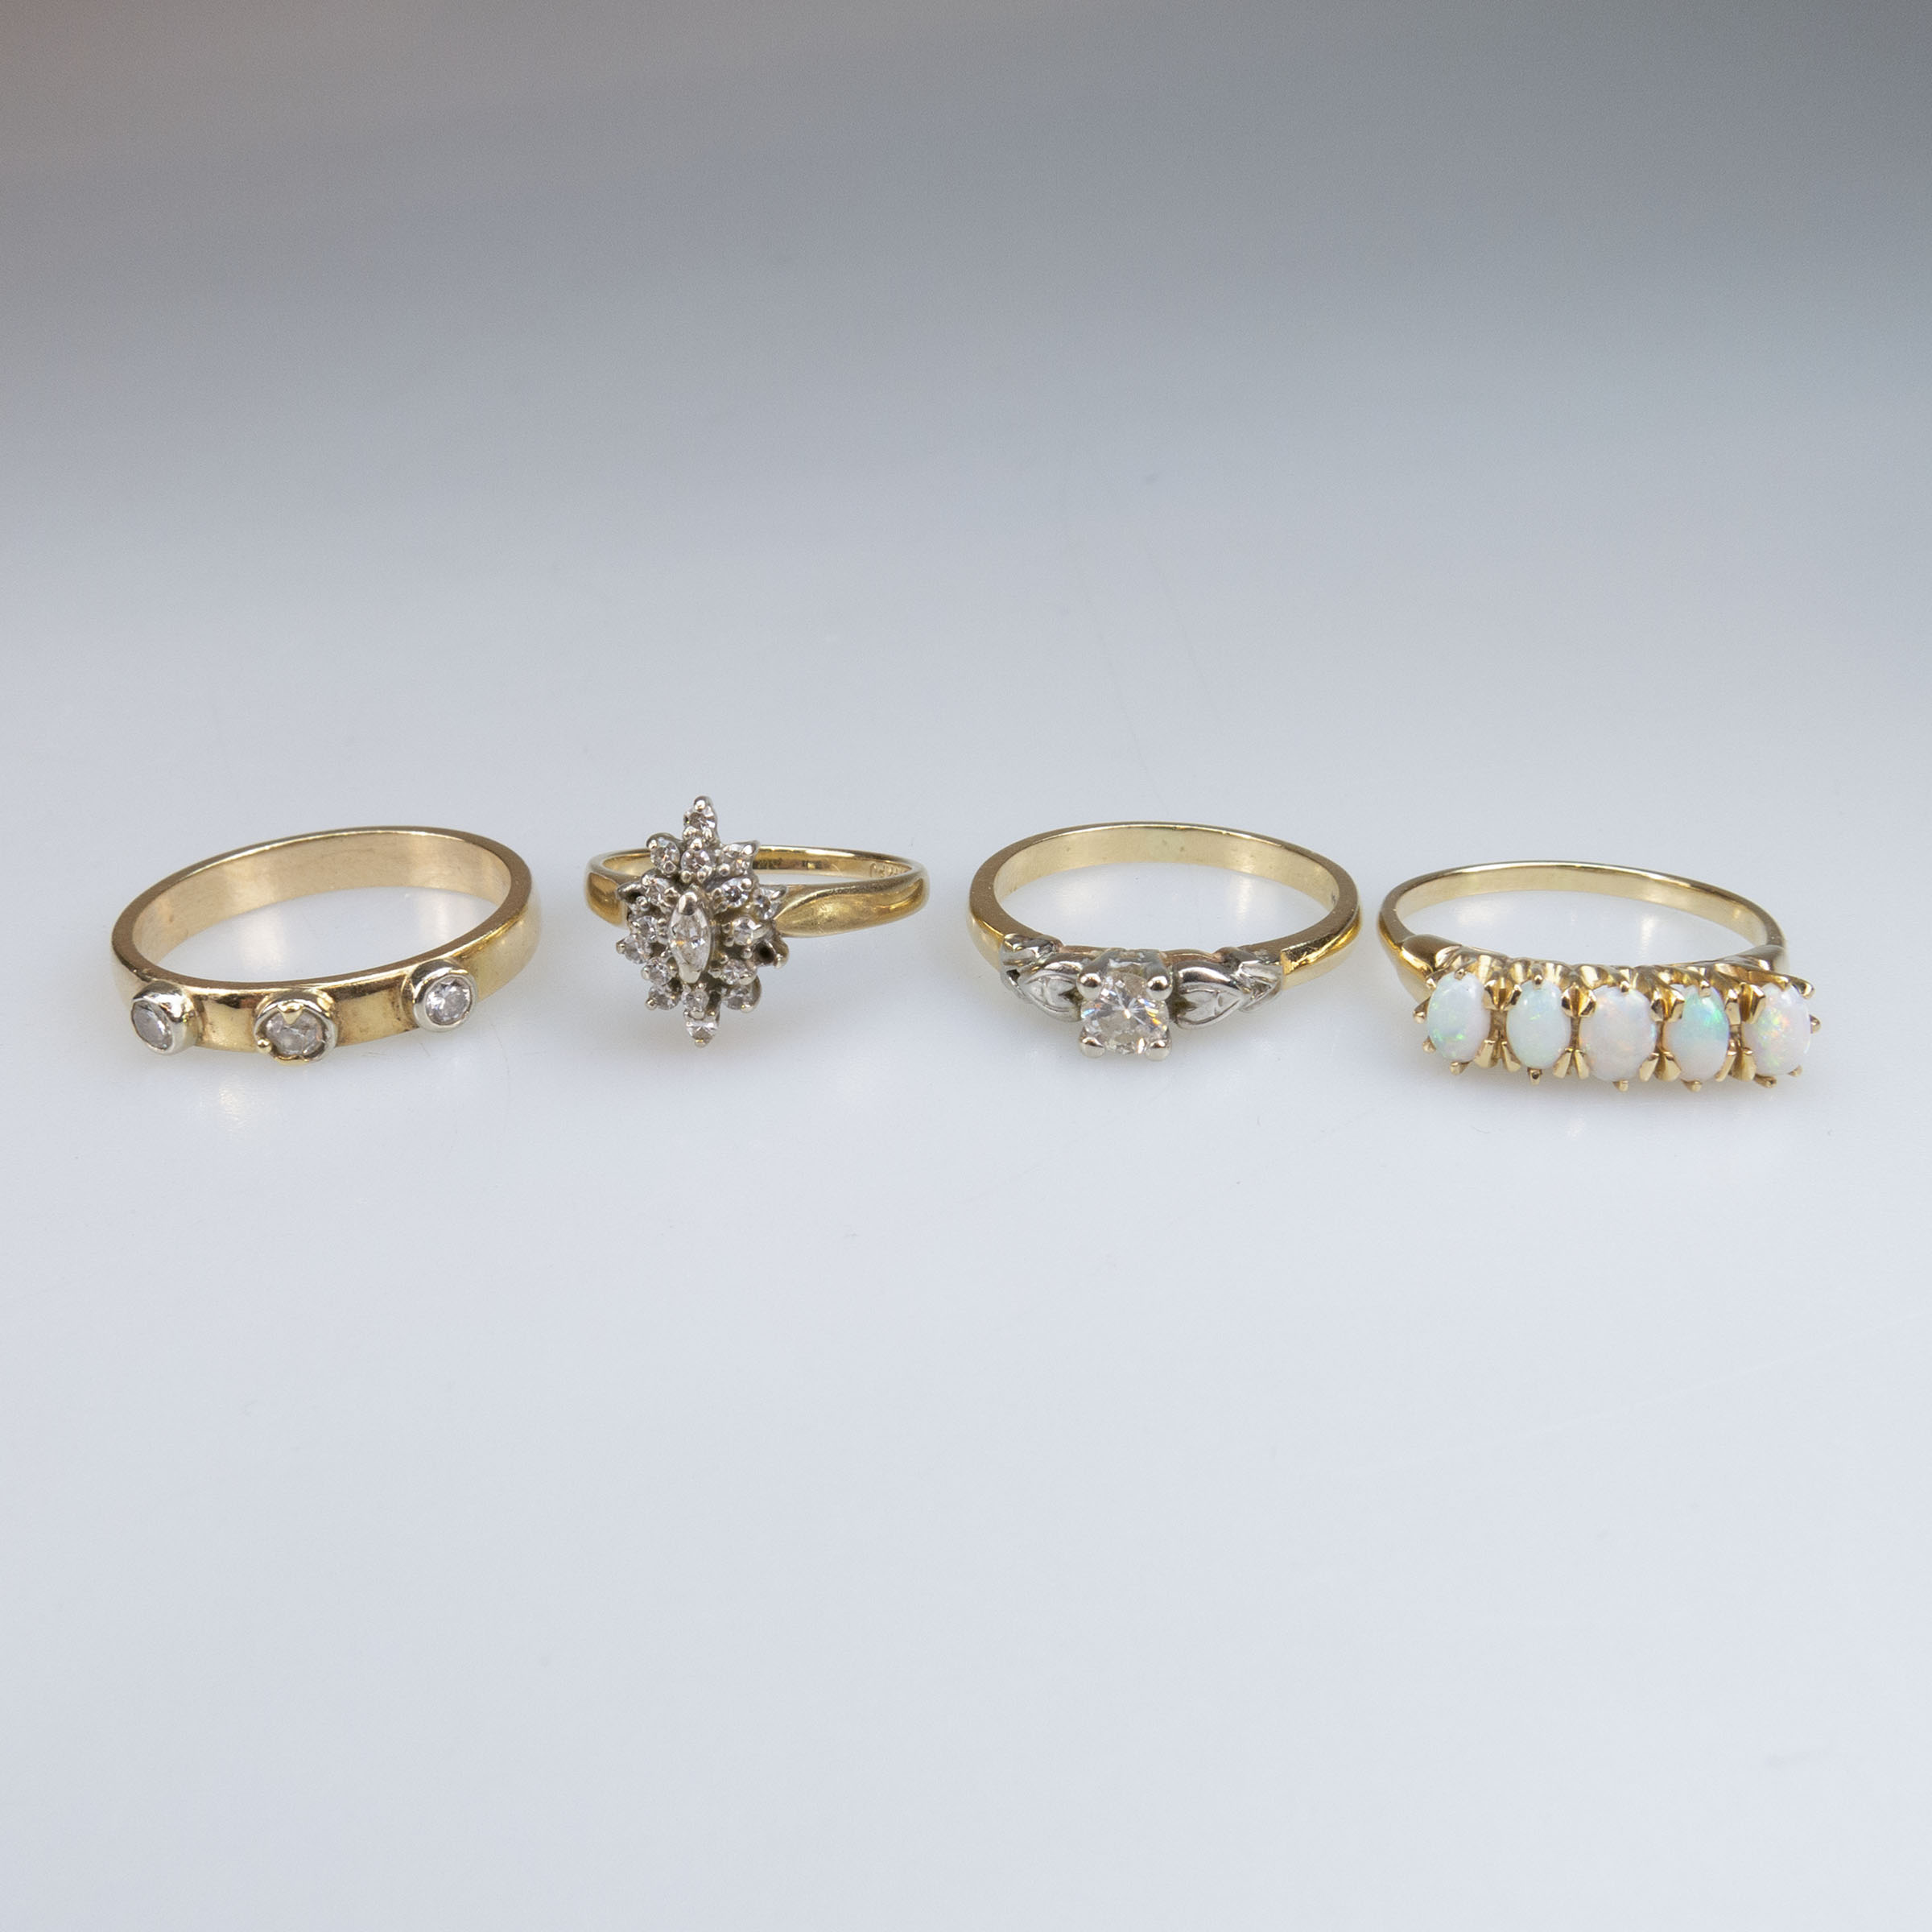 1 x 10k And 3 x 14k Yellow Gold Rings